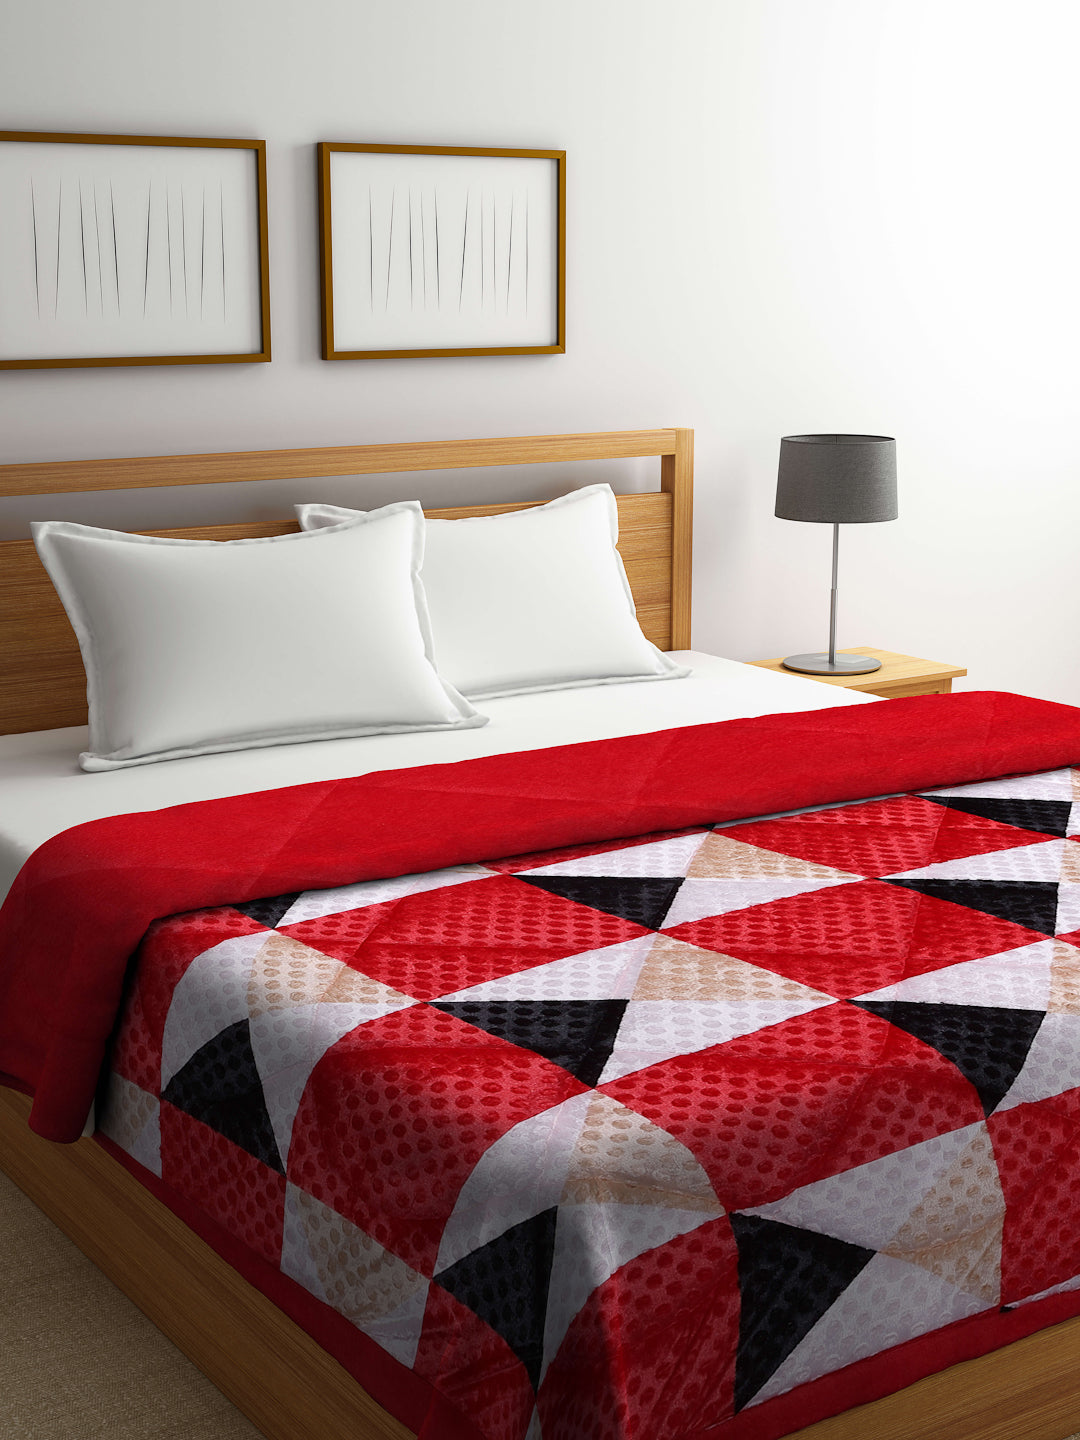 King Size Woolen Winter Quilt for Double Bed by ARRABI® (230 X 220 cm)